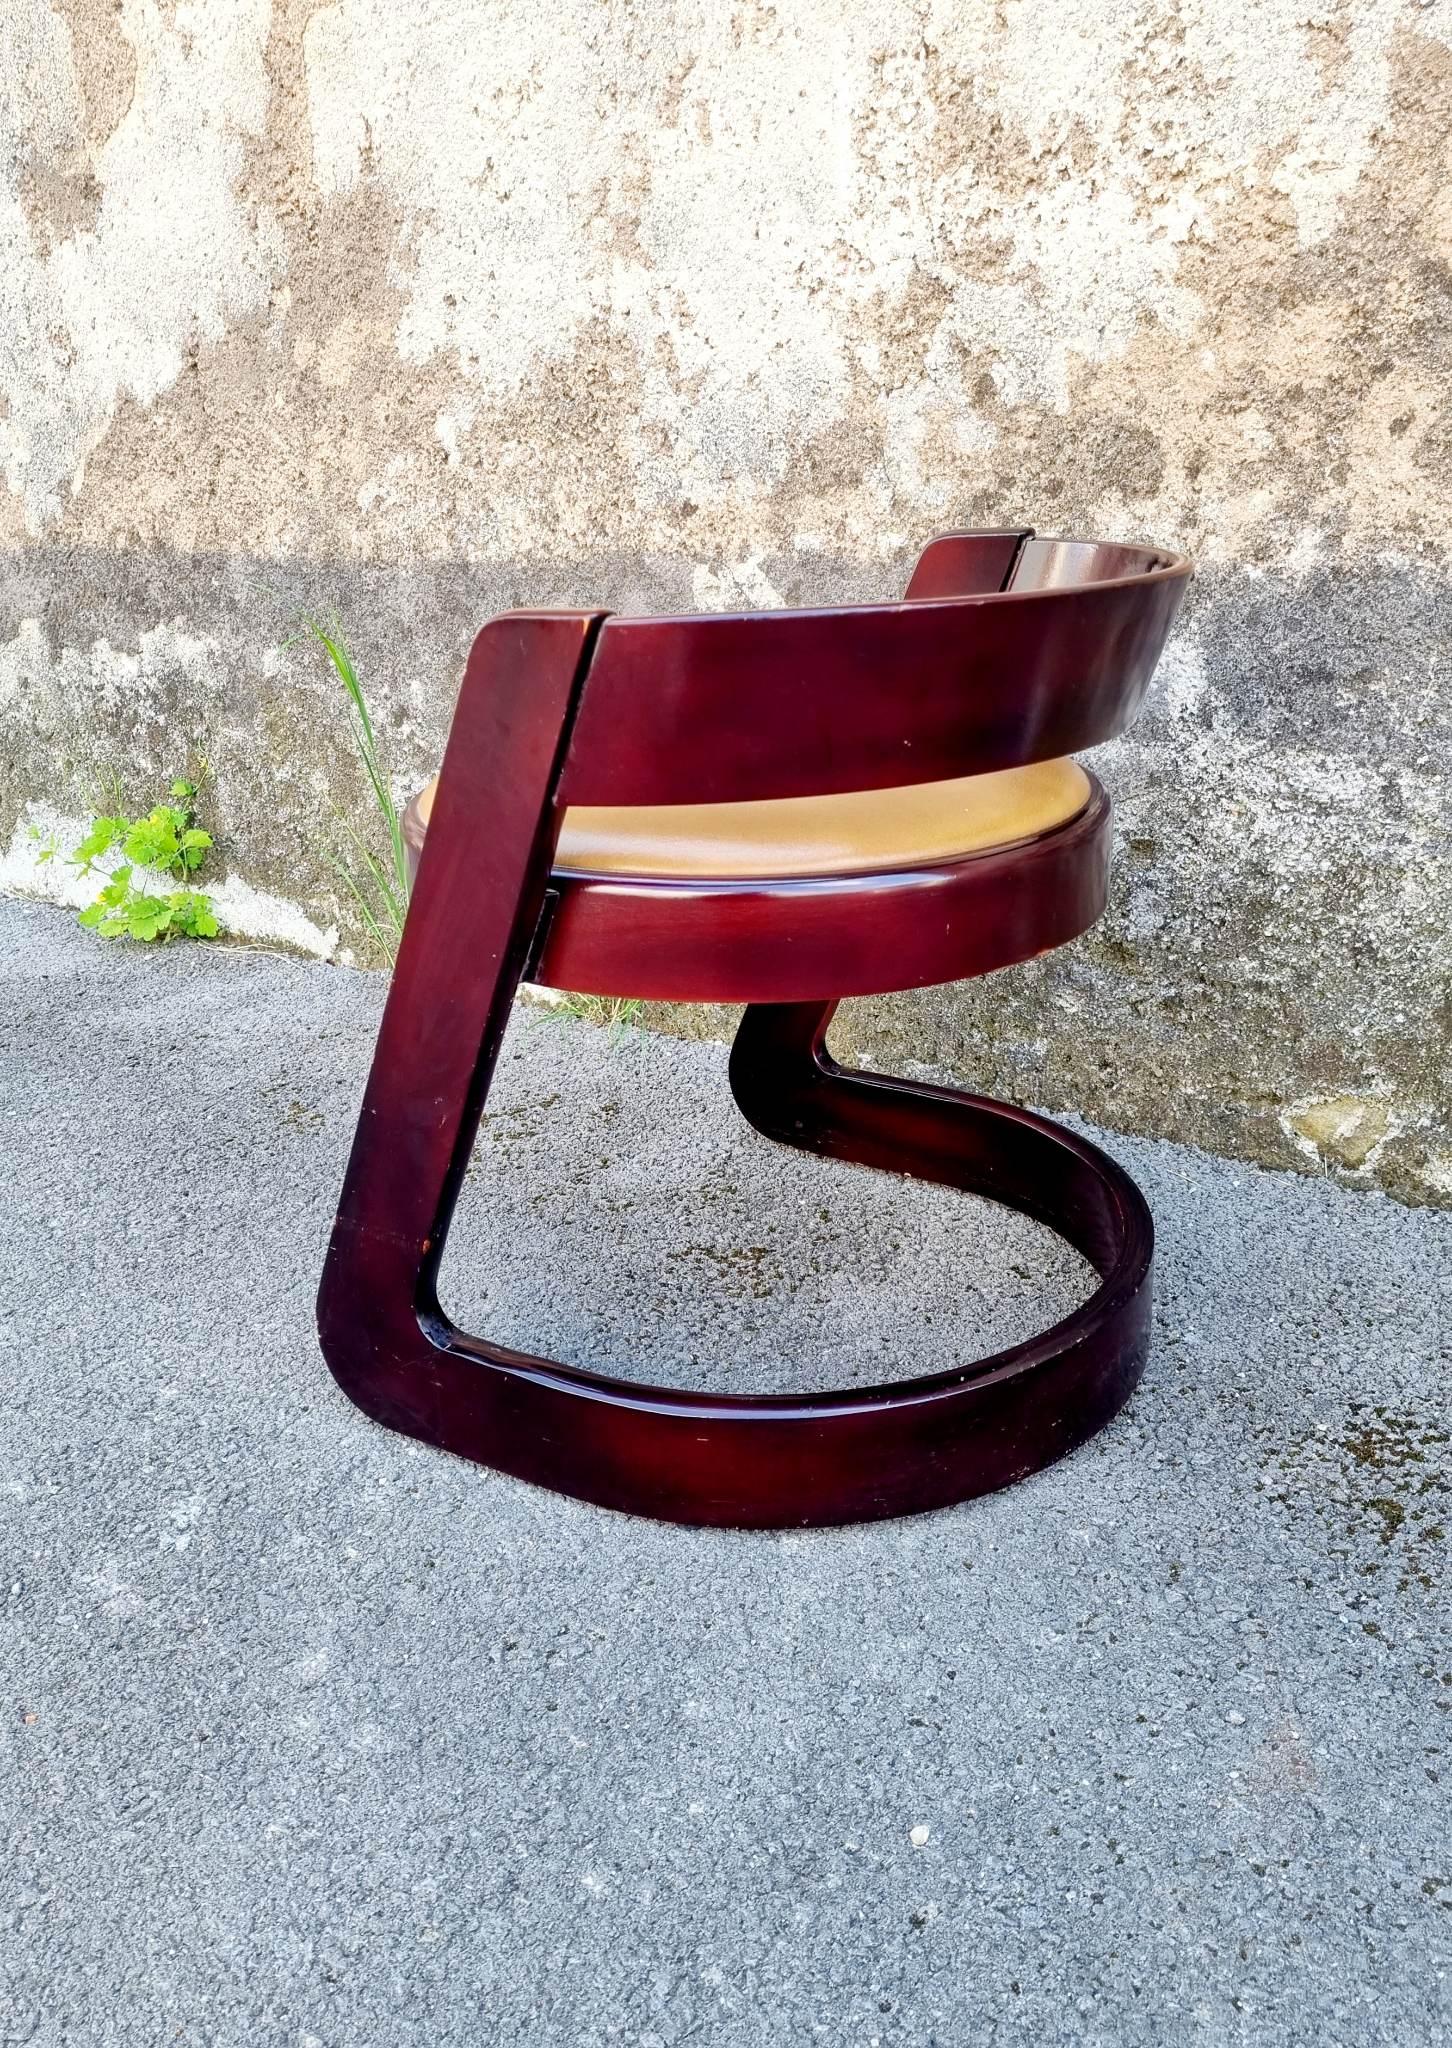 Rare Midcentury Stool Produced by Mario Sabot, Italy 70s For Sale 2